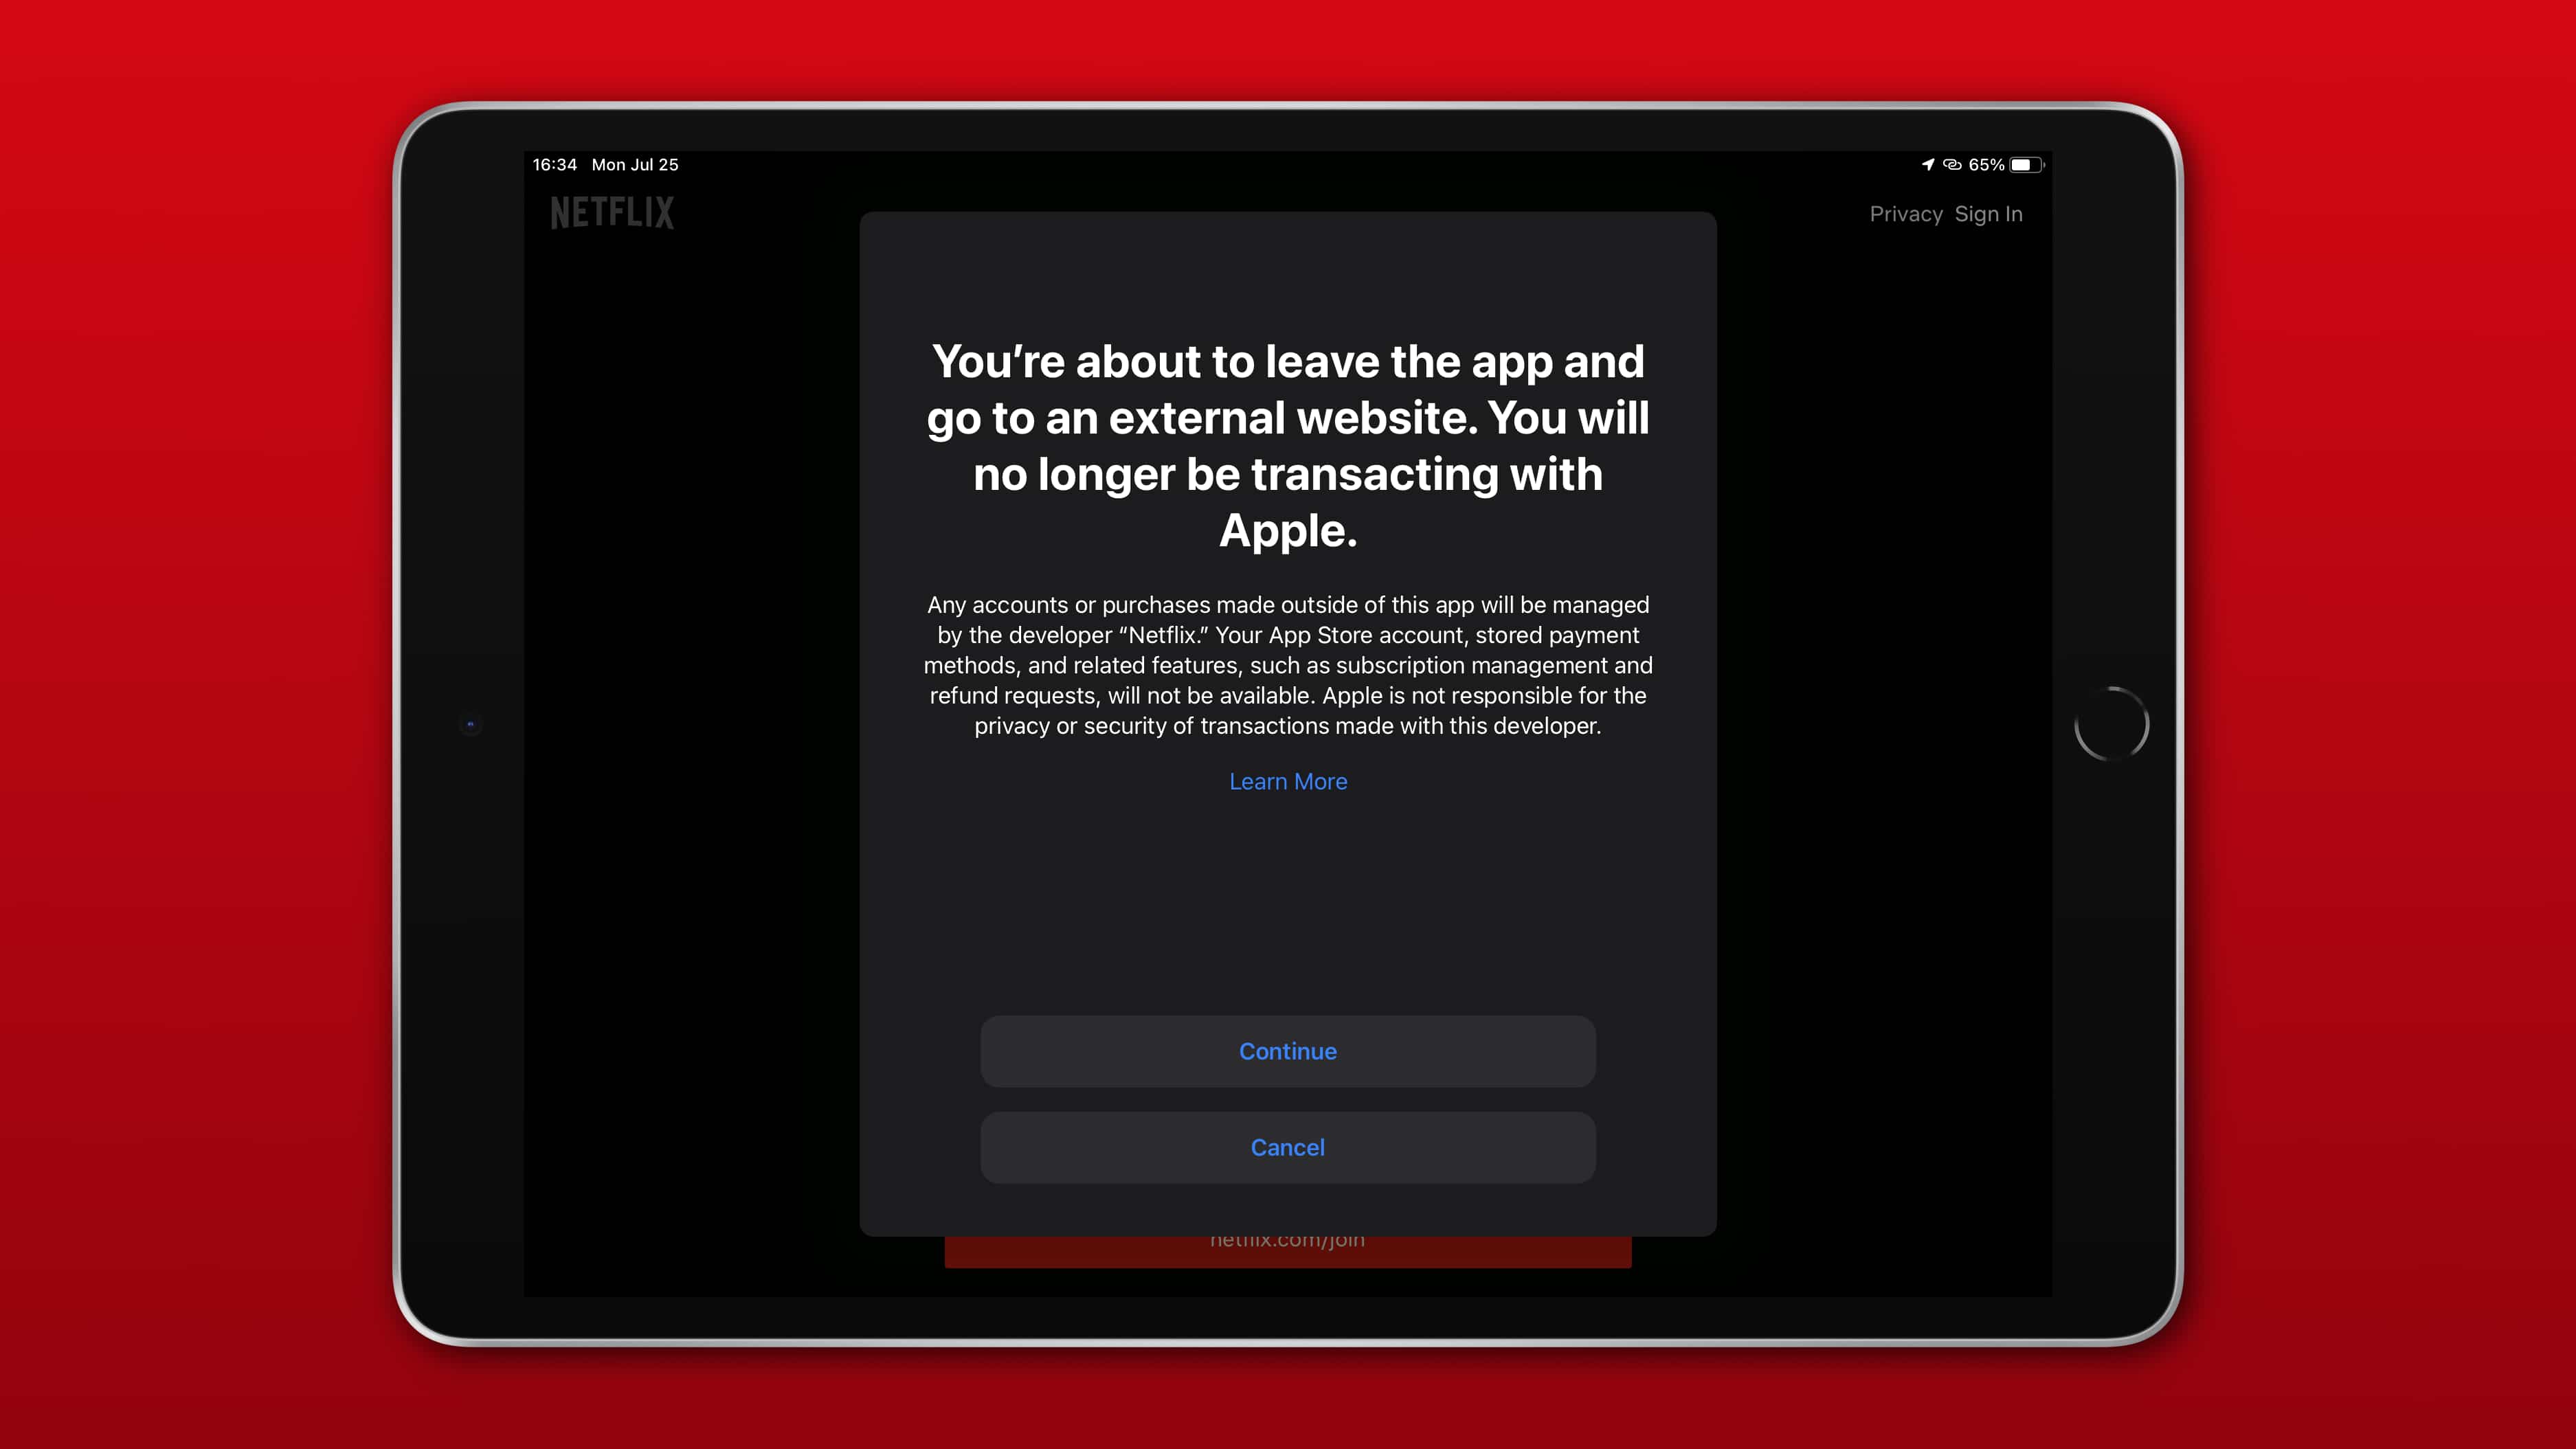 iPad screenshot showing a disclaimer when using external payments in the Netflix app